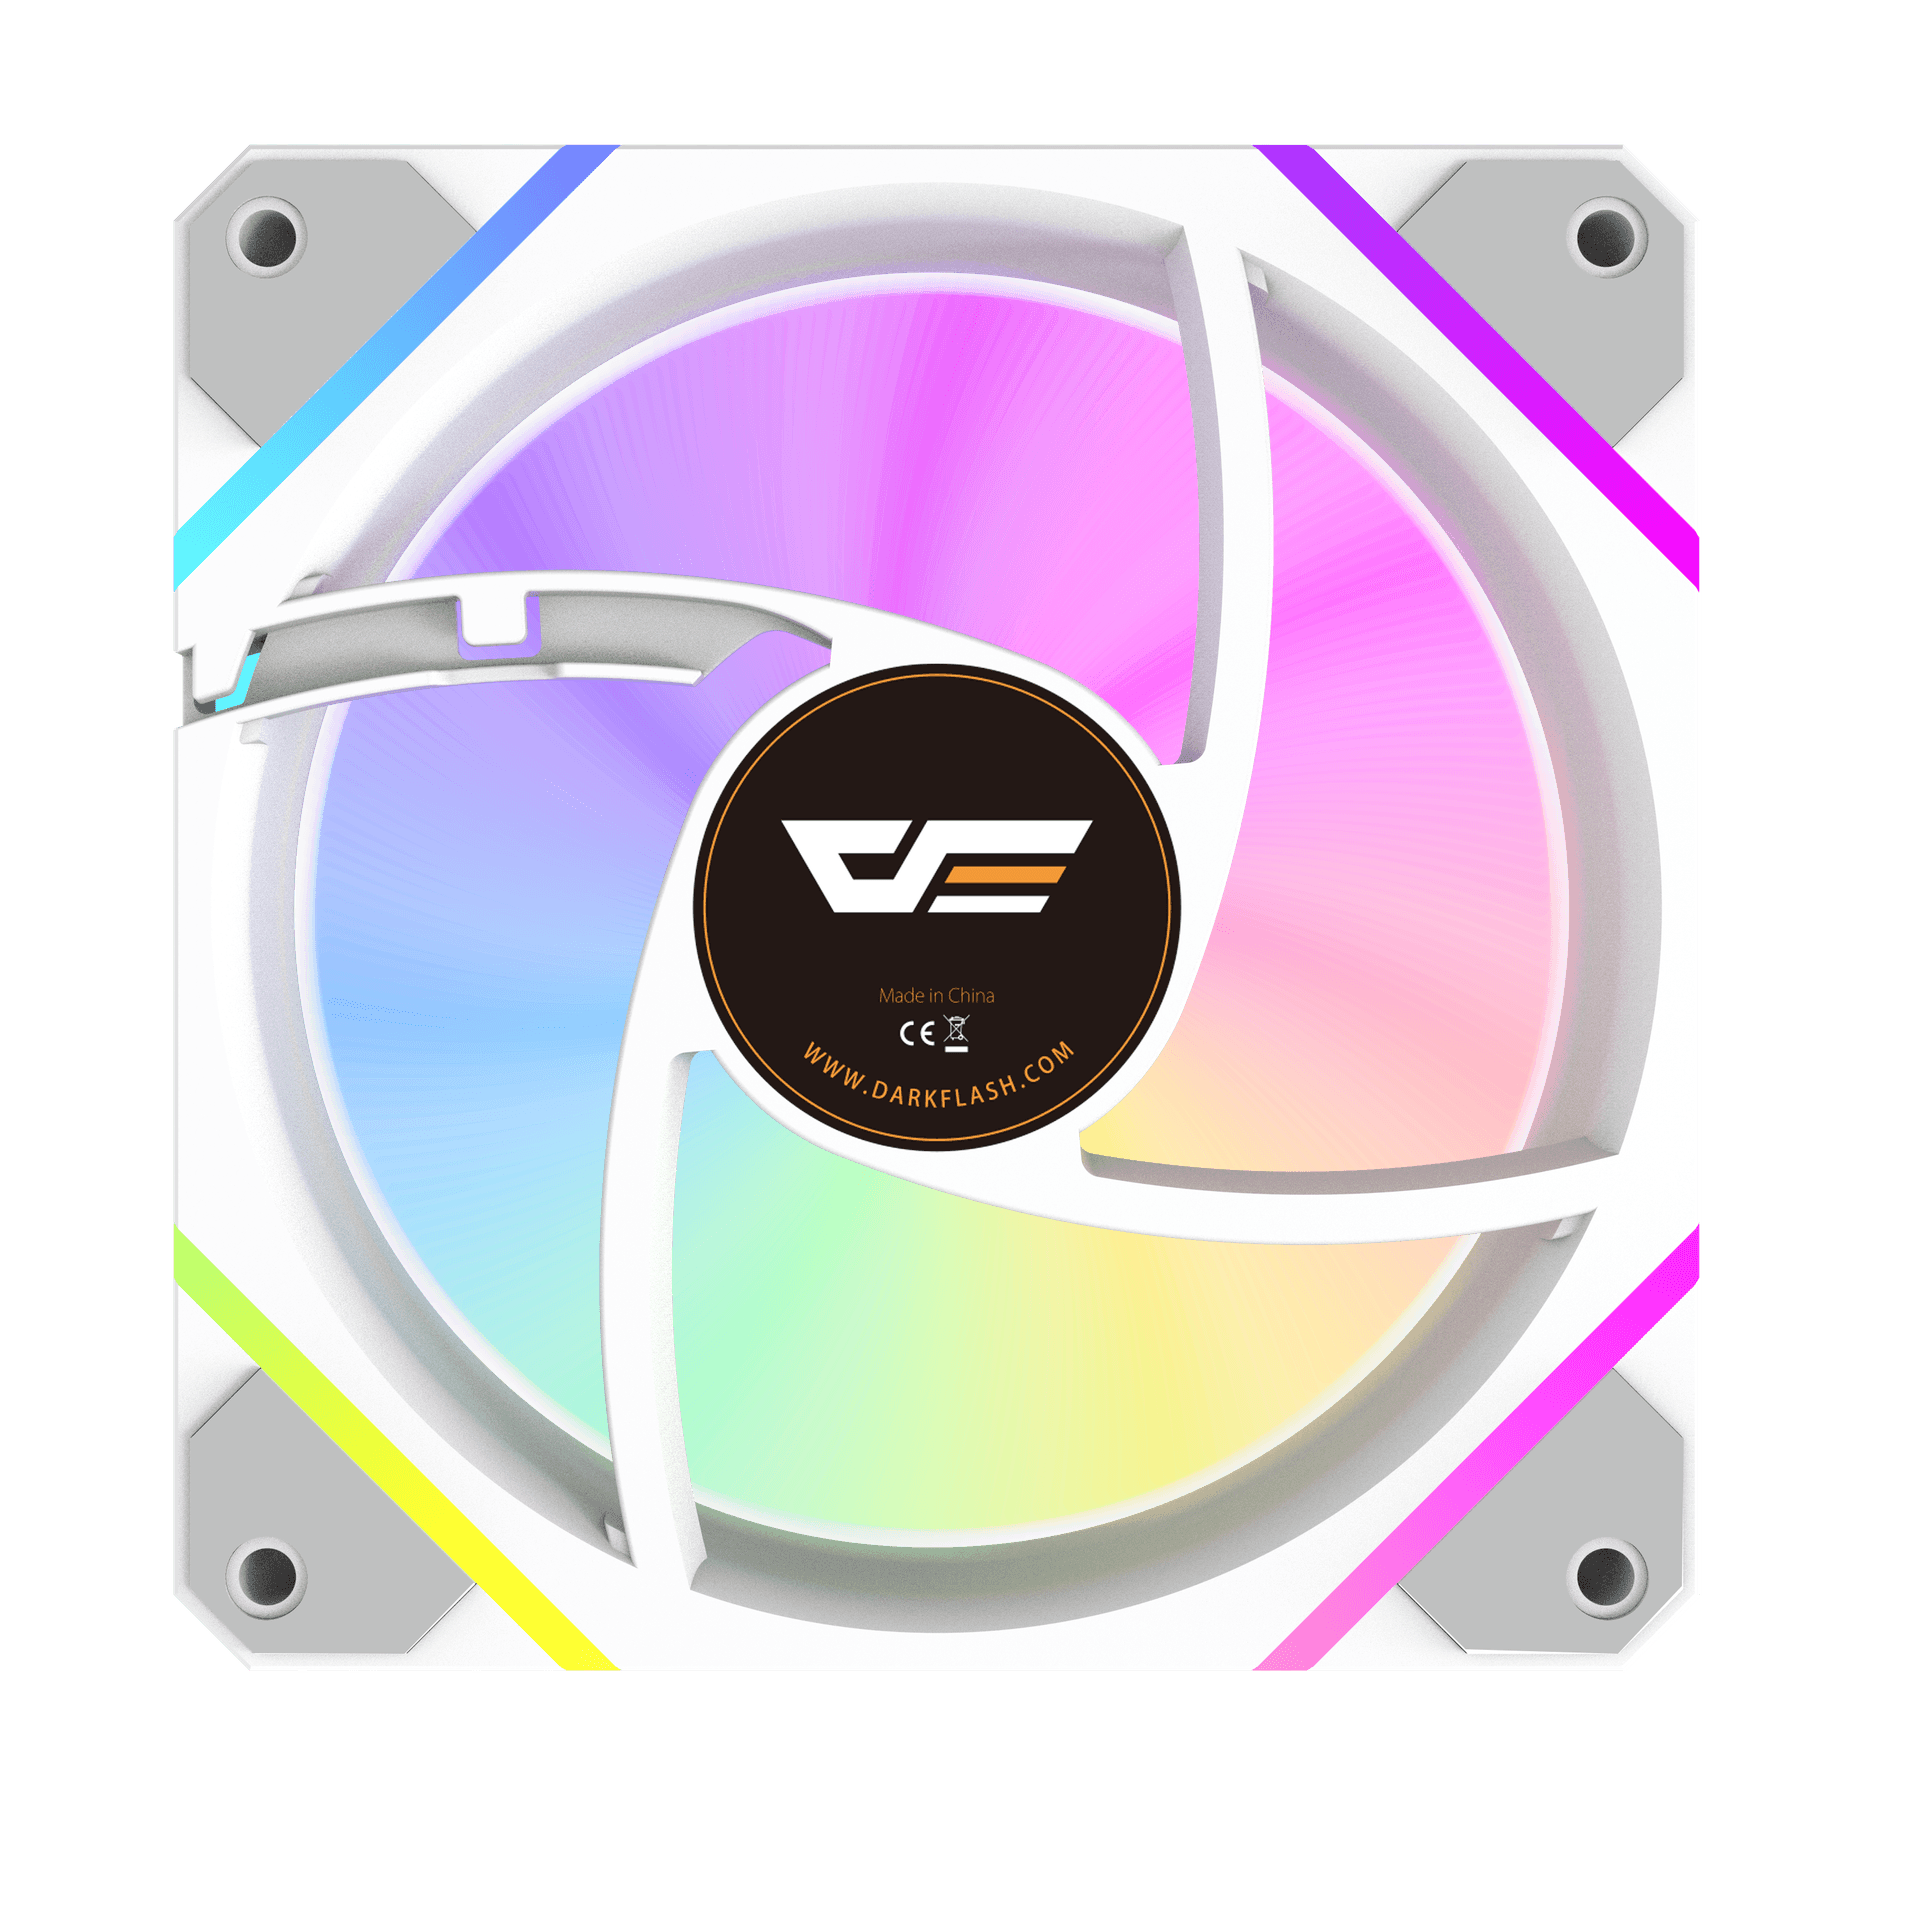 DarkFlash DM12F 3-Pack ARGB Computer Case Fan 120mm Cooling Fan with Remote Controller